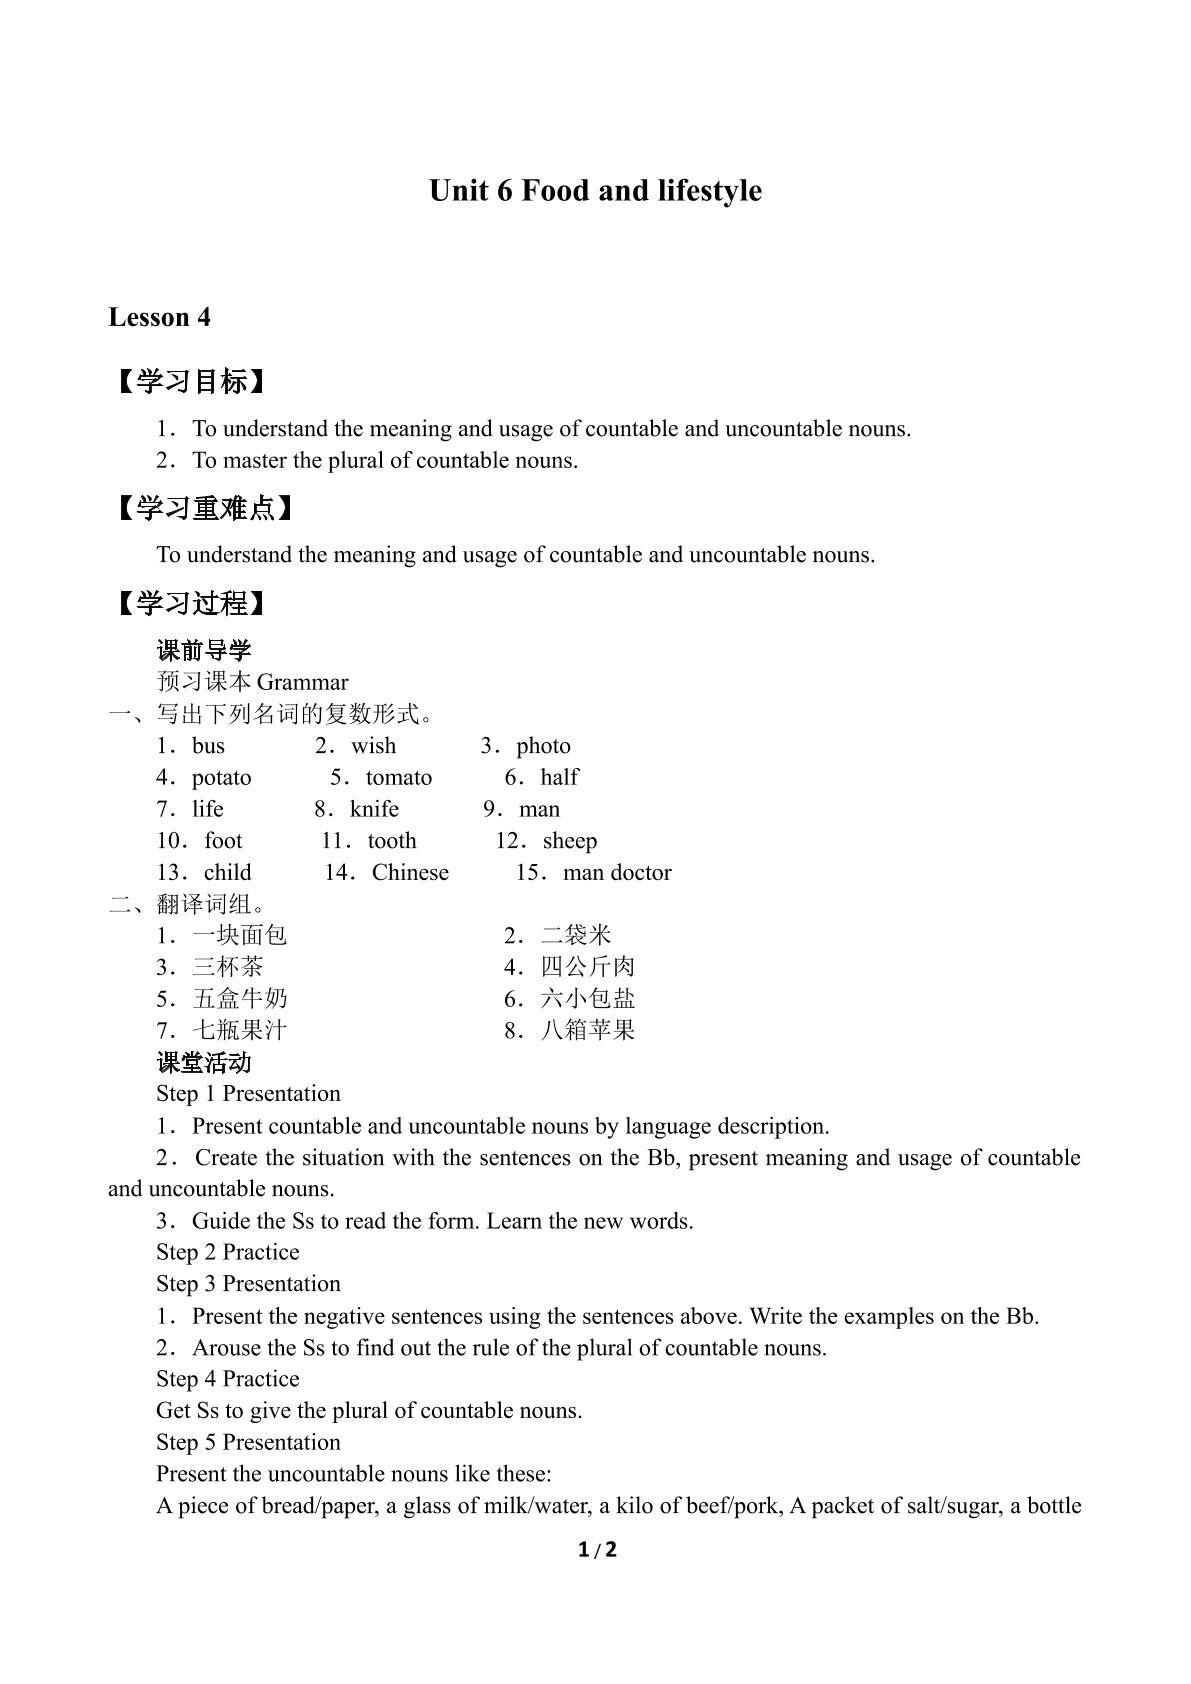 Unit 6 Food and lifestyle_学案4